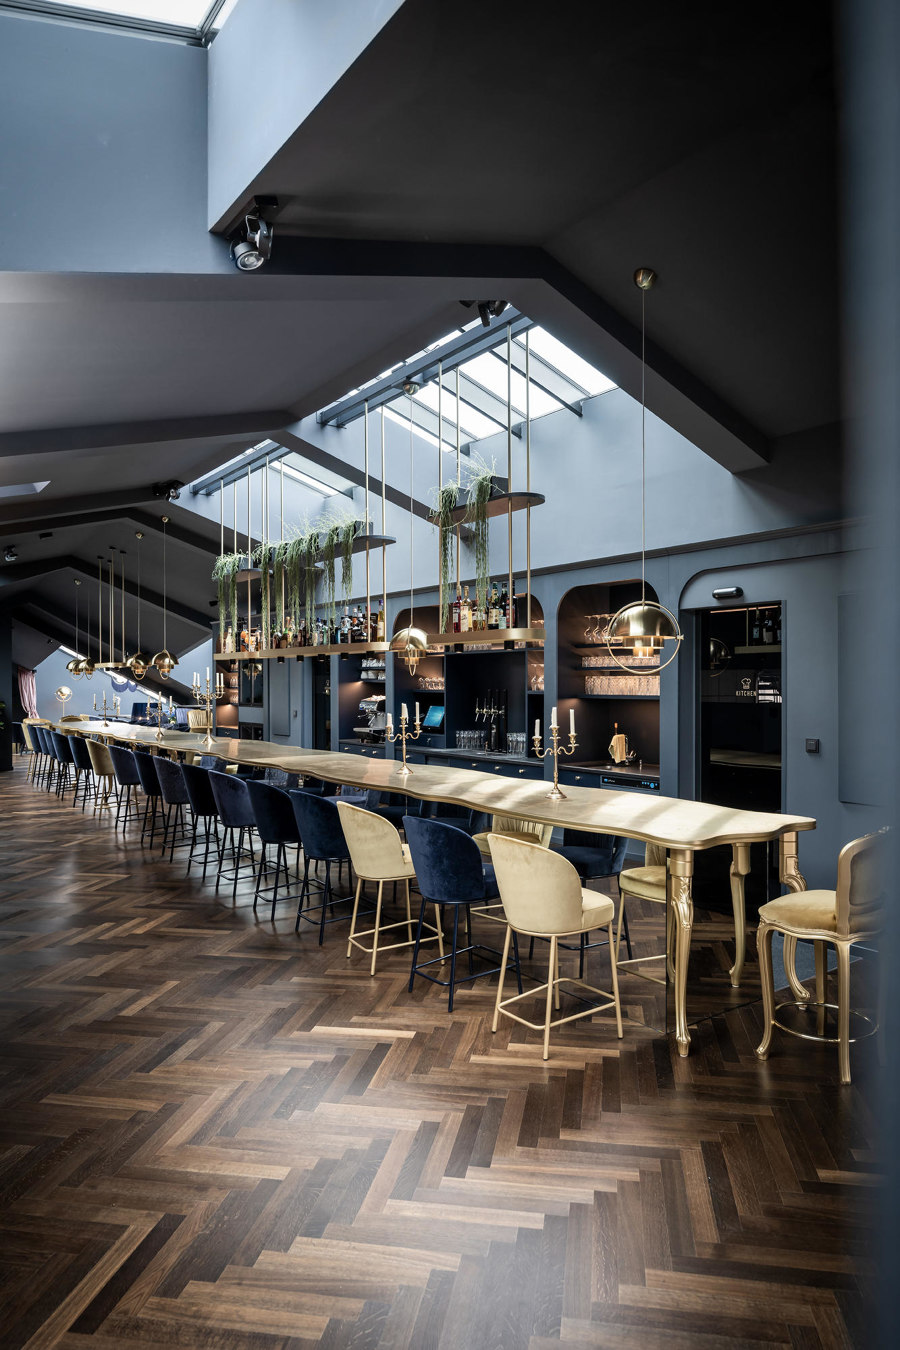 Architonic's most-viewed projects of 2021: Hospitality interiors | News